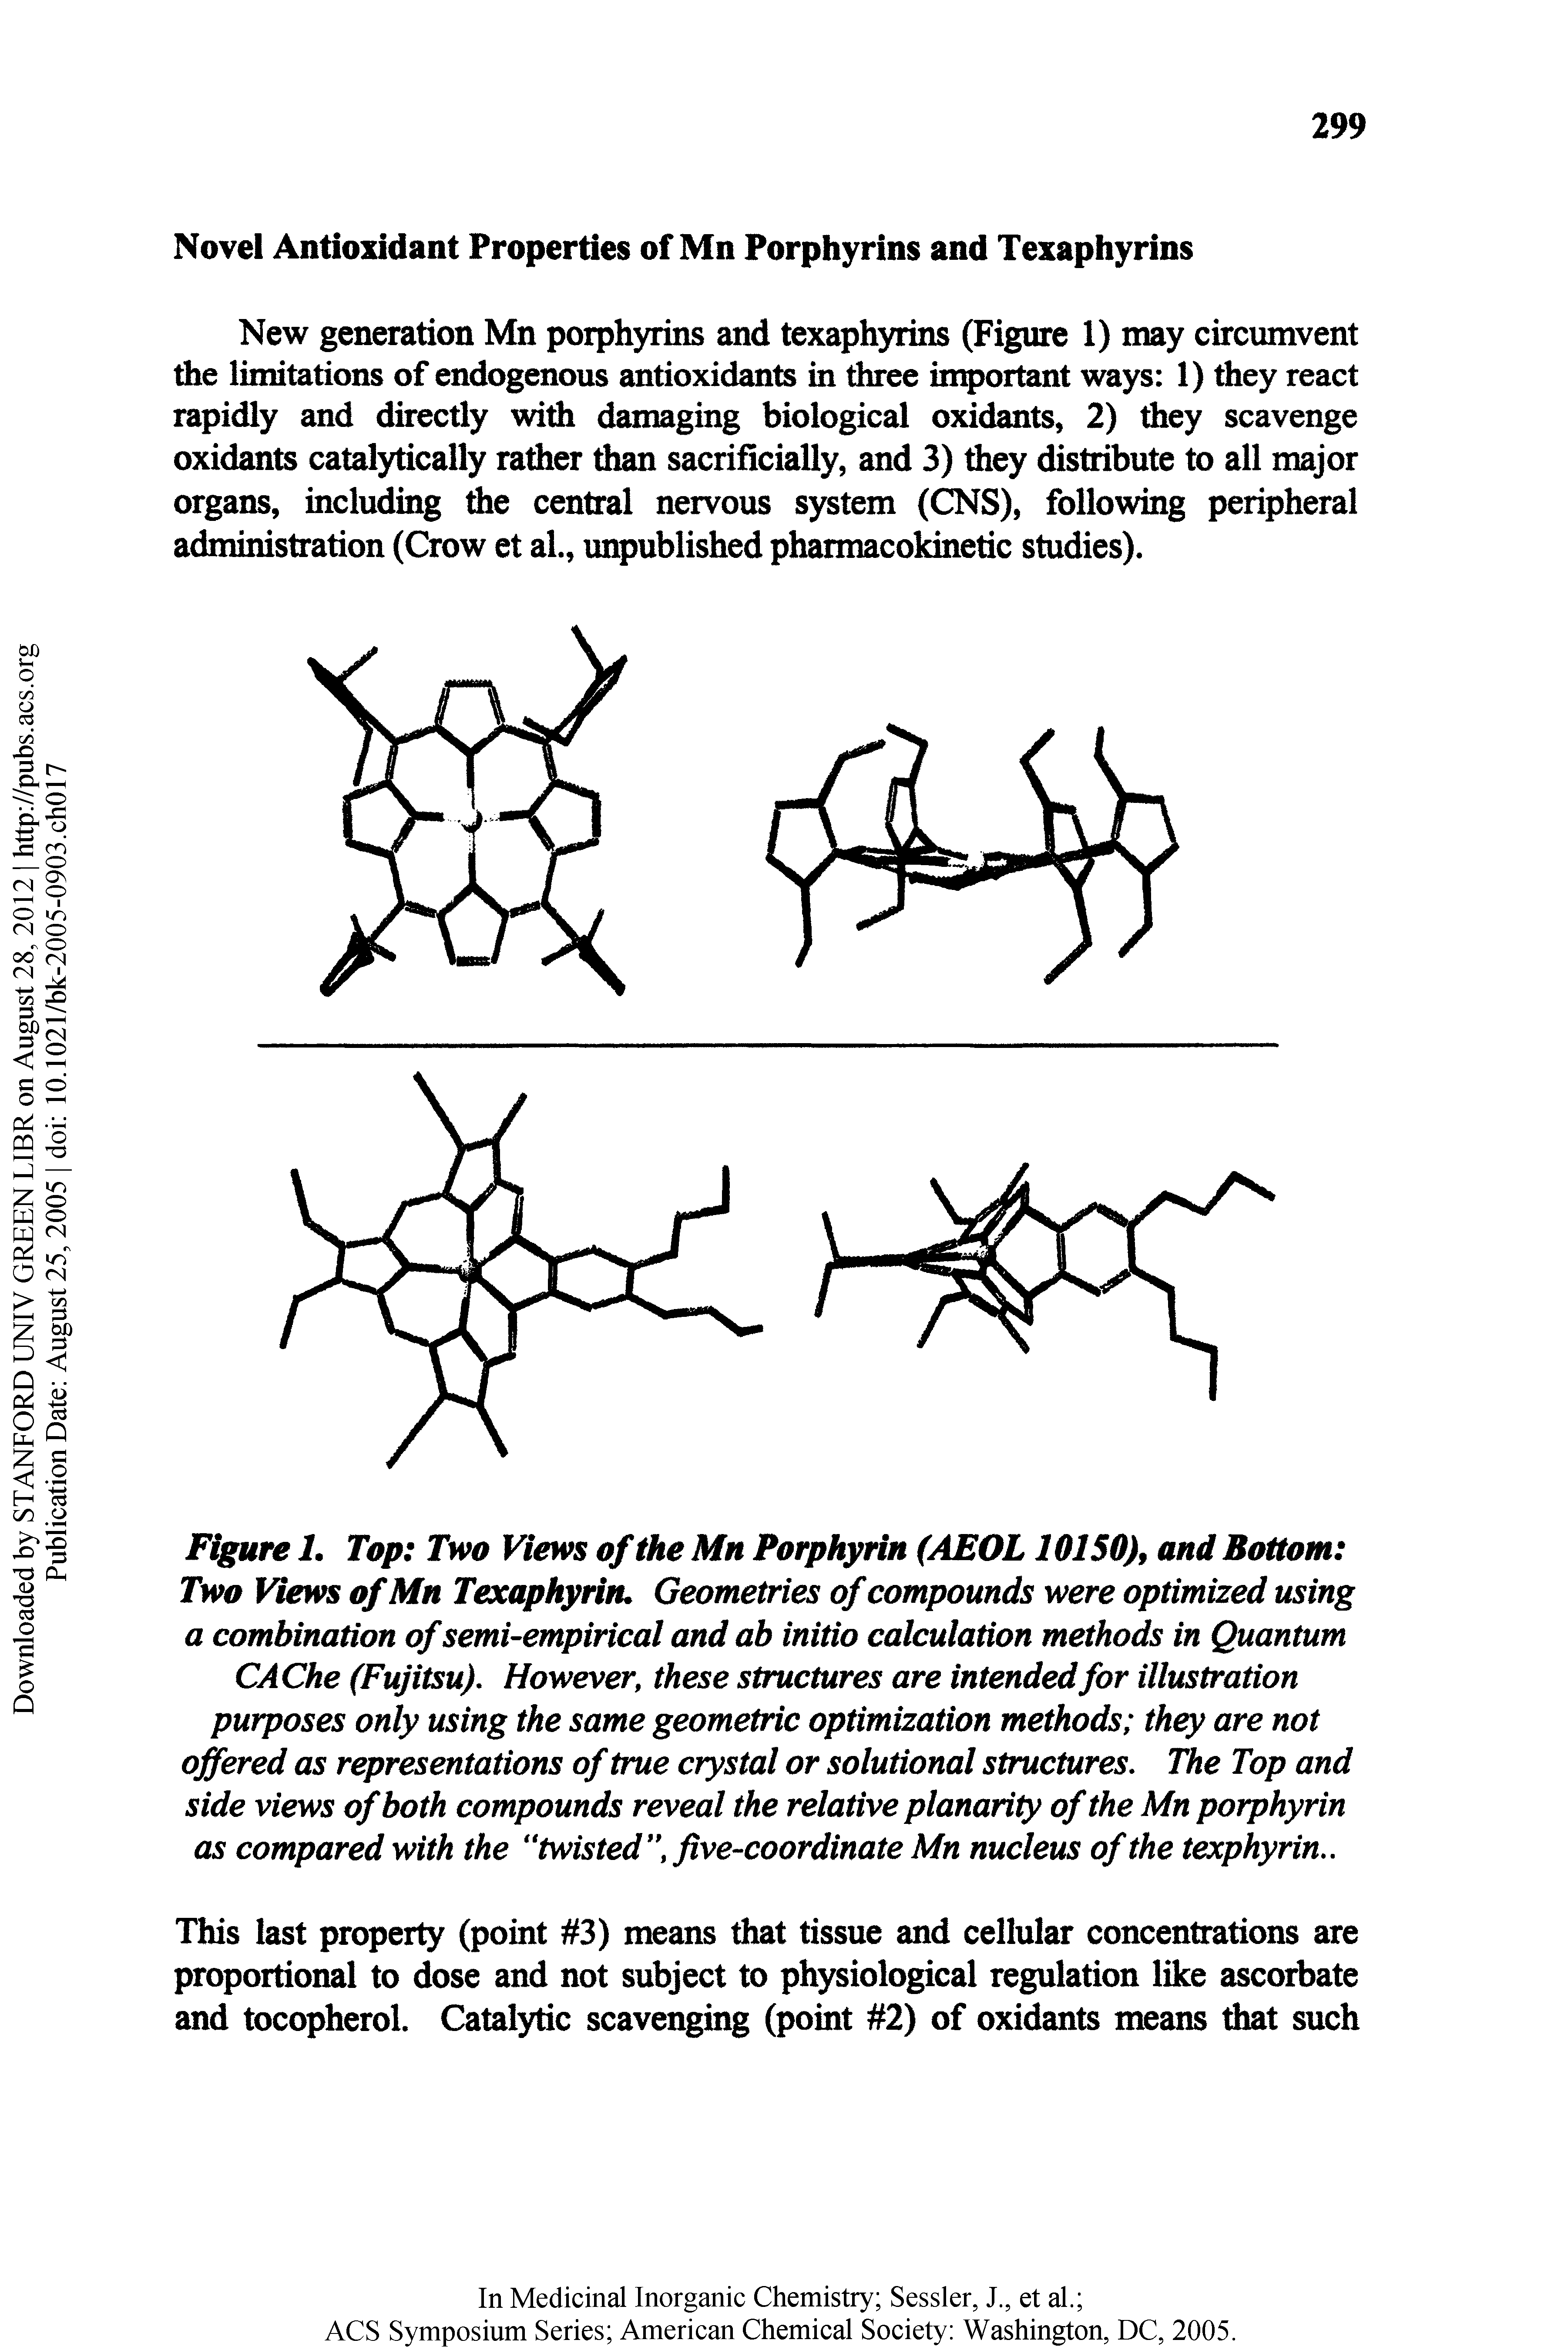 Figure 1. Top Two Views of the Mn Porphyrin (AEOL10150), and Bottom Two Views of Mn Texaphyrim Geometries of compounds were optimized using a combination of semUempirical and ab initio calculation methods in Quantum CAChe (Fujitsu), However, these structures are intended for illustration purposes only using the same geometric optimization methods they are not offered as representations of true crystal or solutional structures. The Top and side views of both compounds reveal the relative planarity of the Mn porphyrin as compared with the twisted , five-coordinate Mn nucleus of the texphyrin..